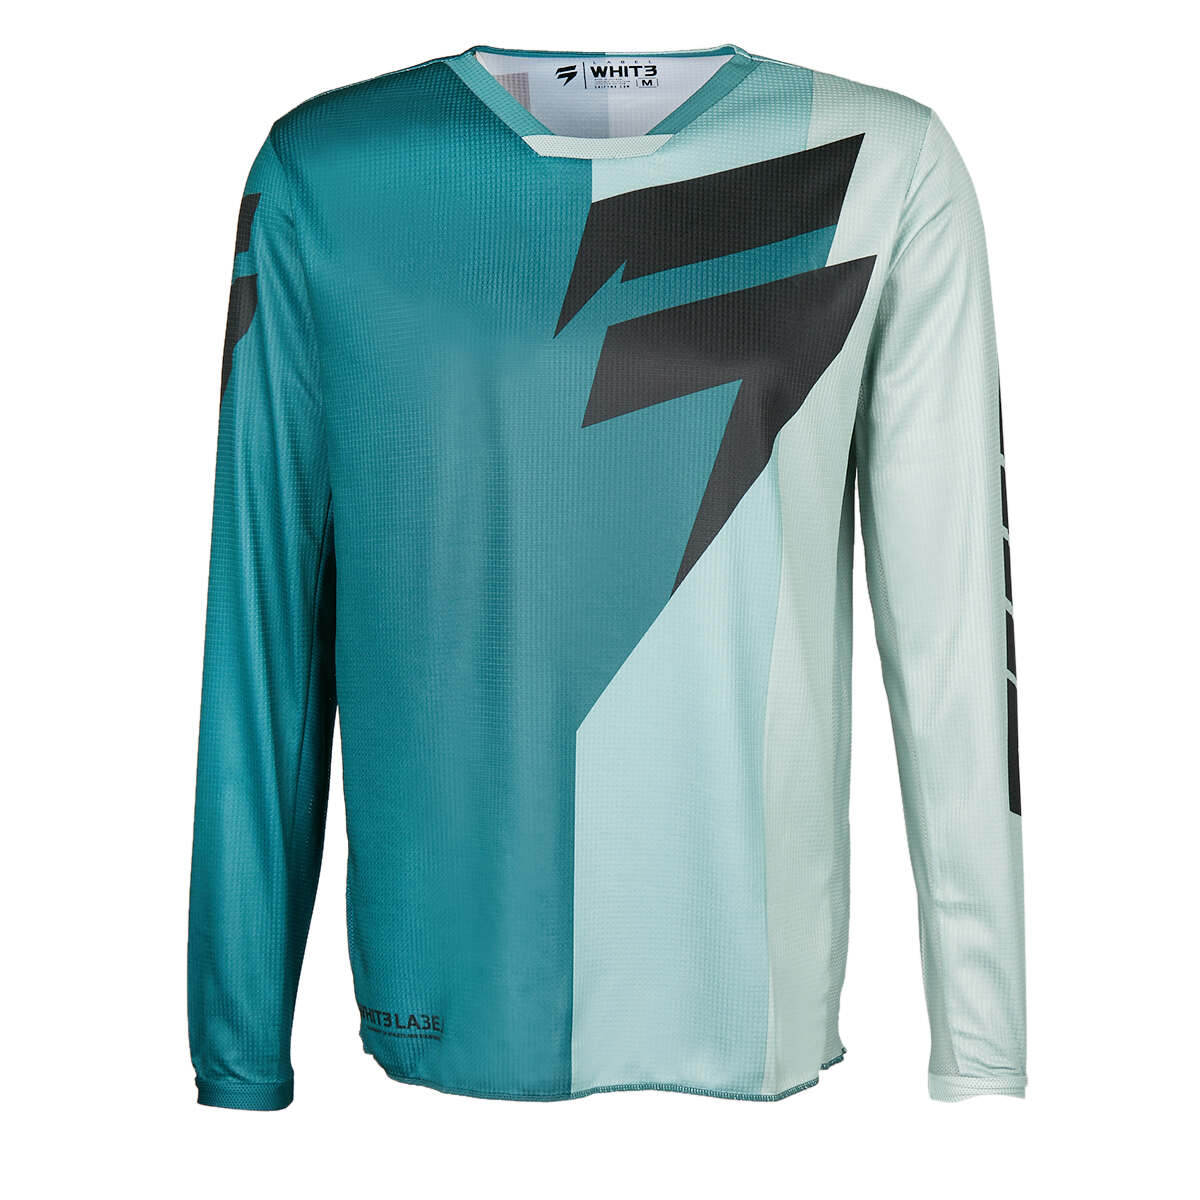 Shift Jersey Whit3 Label Tarmac - Teal